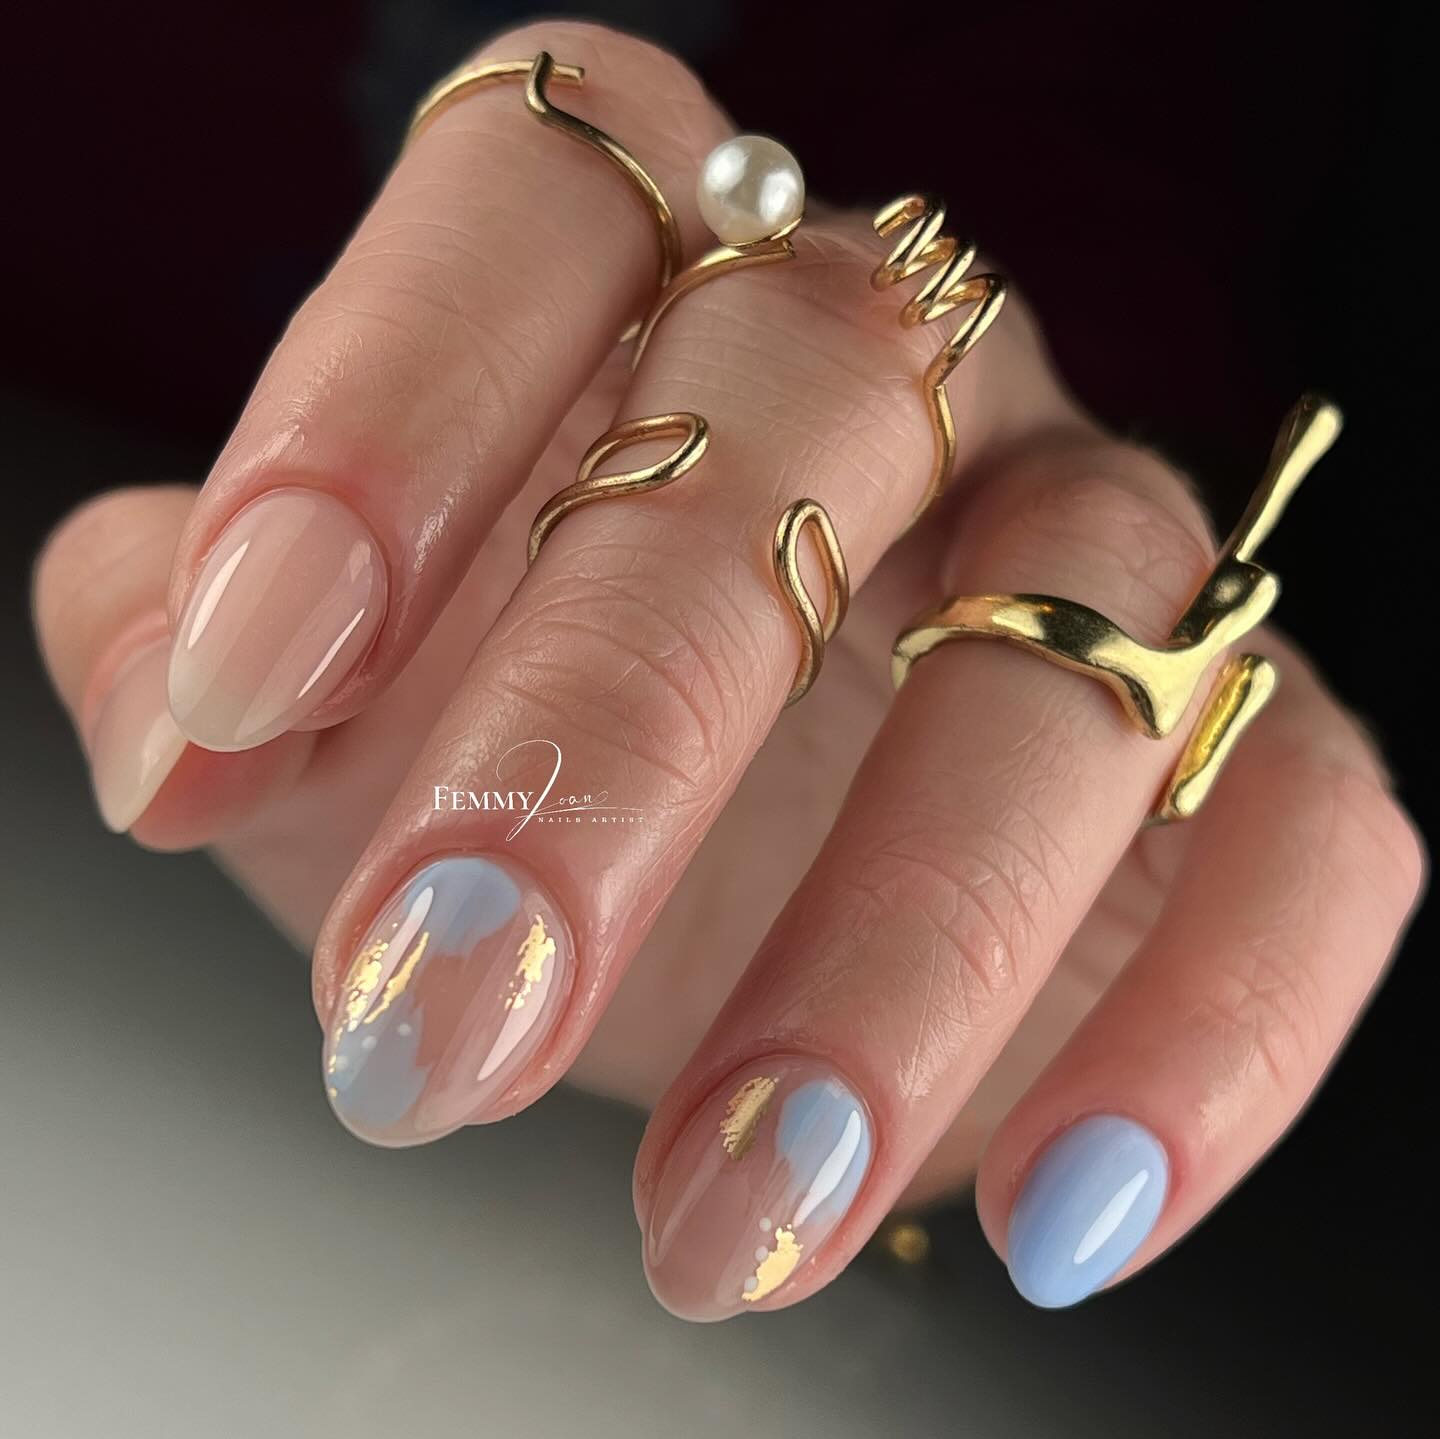 100 Pretty Spring Nail Designs To Try This Year images 13